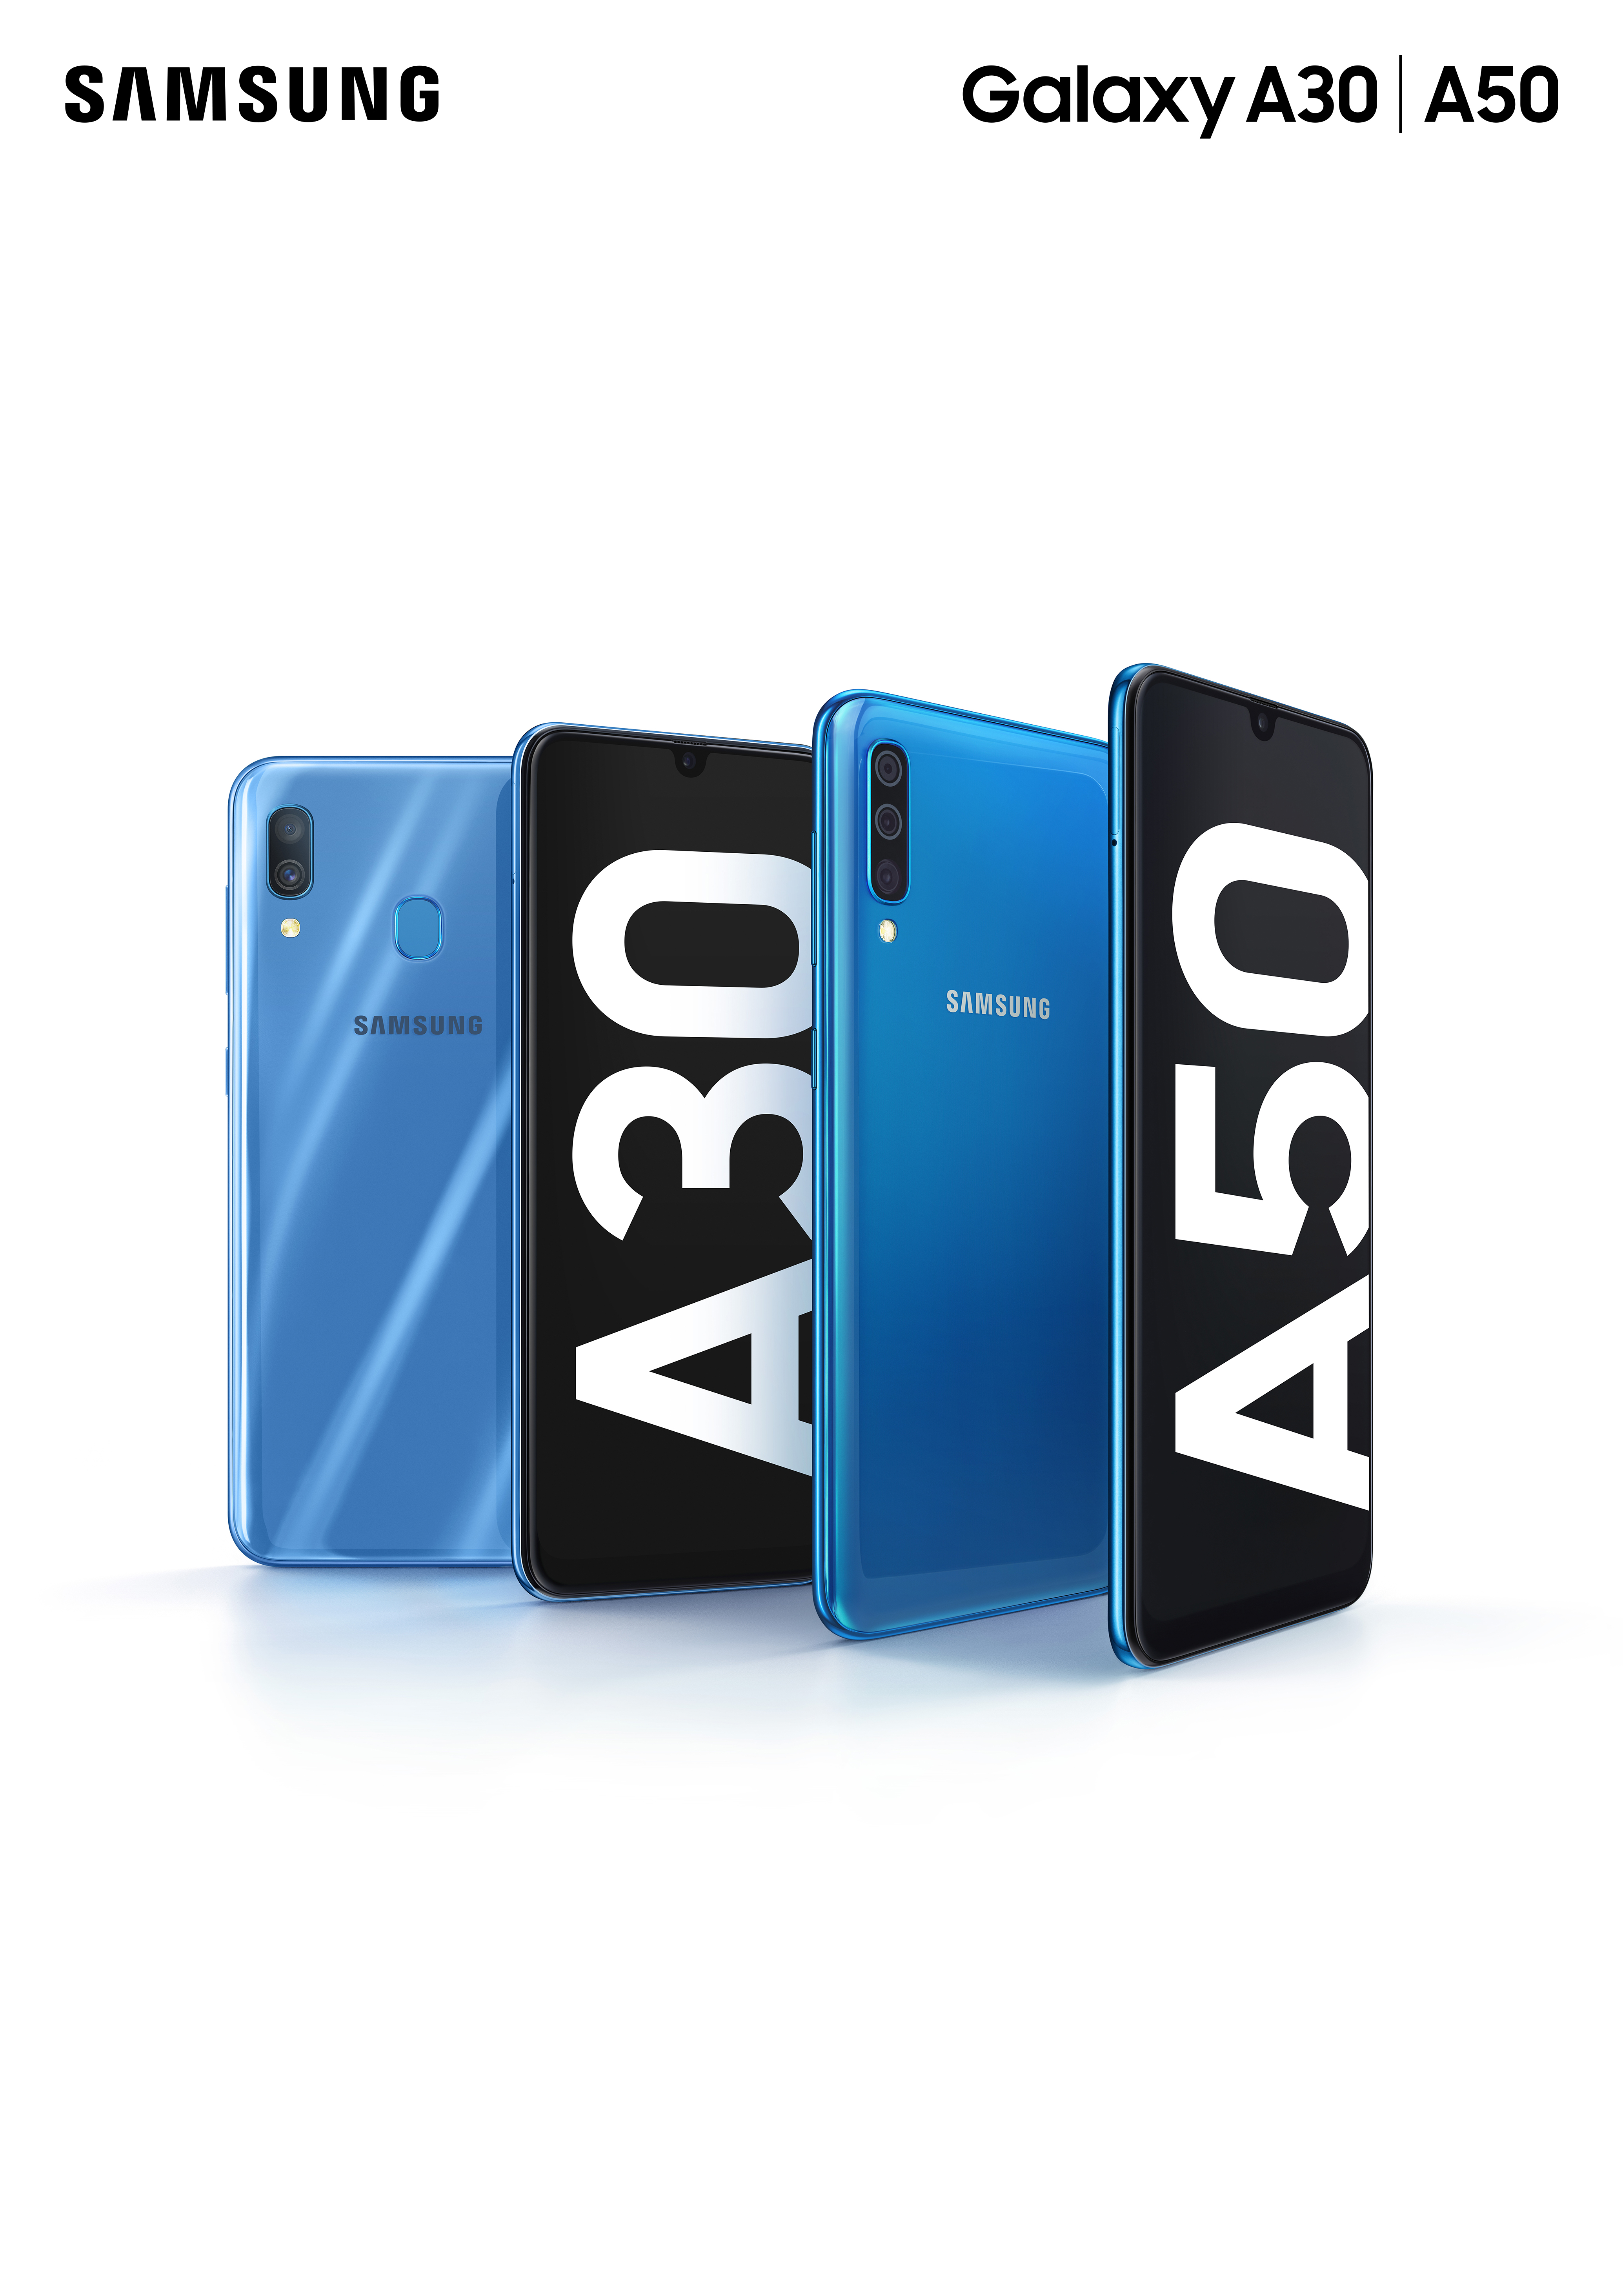 Samsung unveils the Galaxy A30 and A50 for lovers of sub 